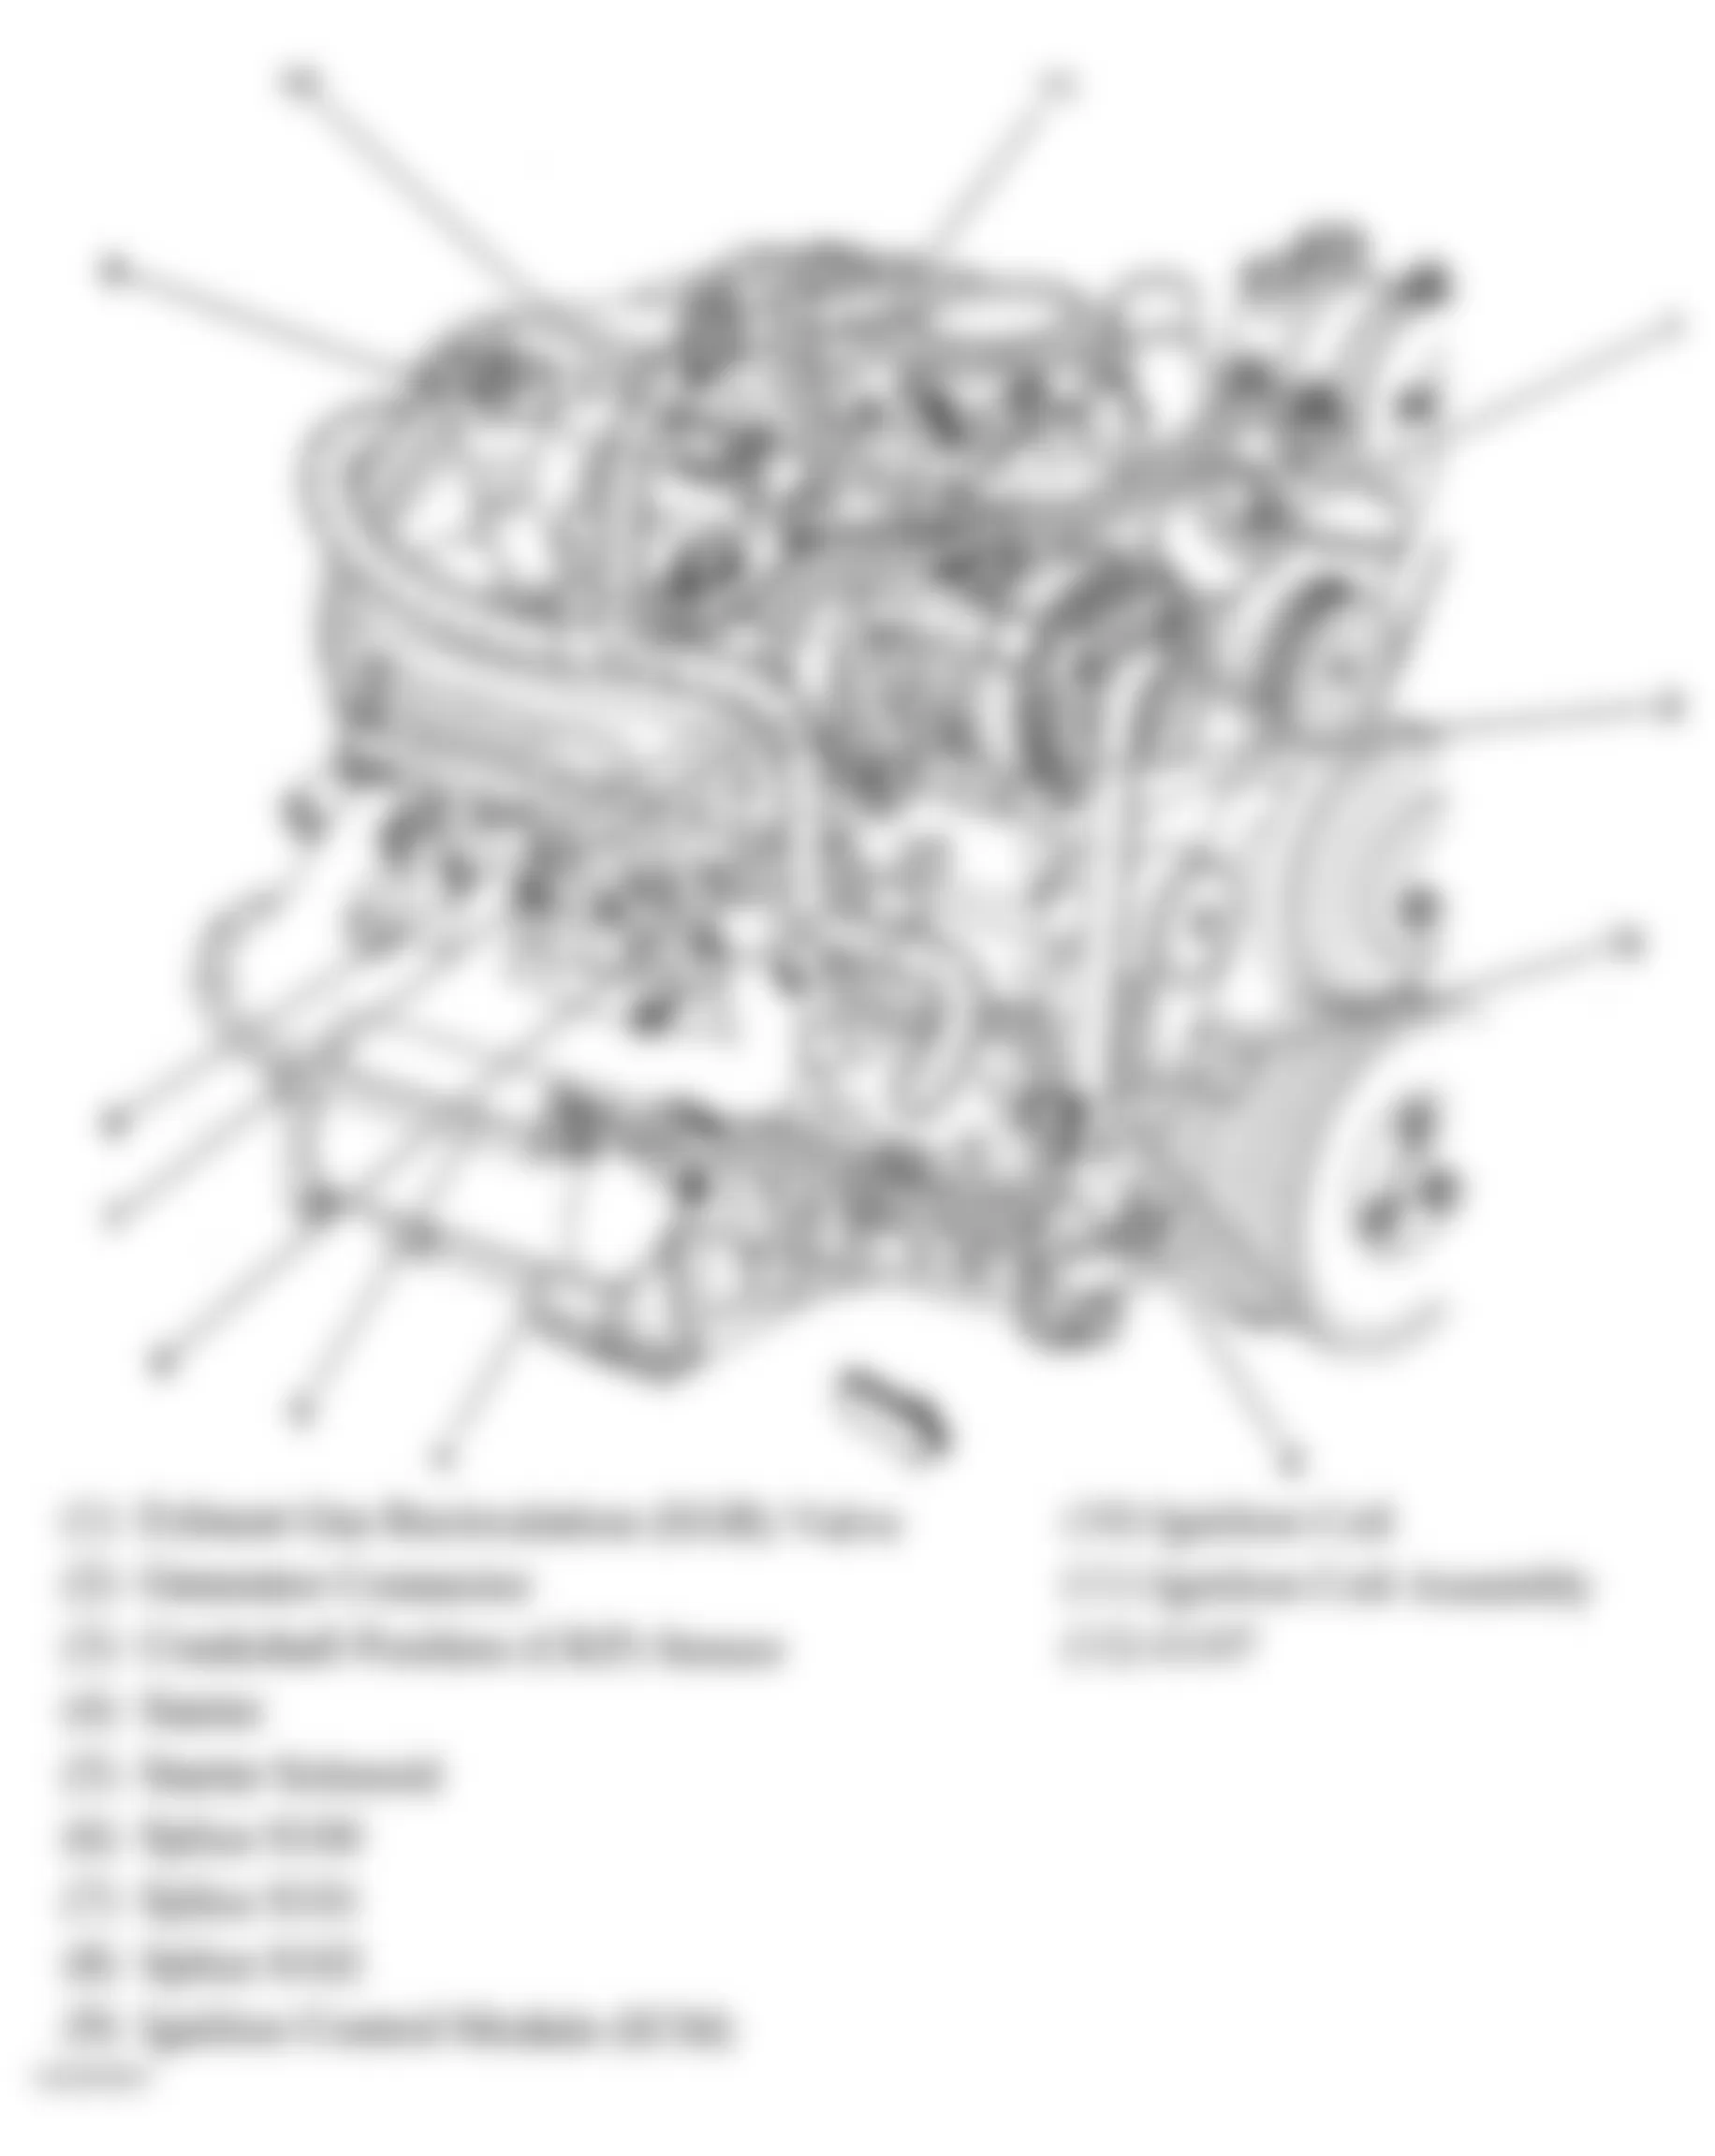 GMC Sonoma 2004 - Component Locations -  Right Side Of Engine (4.3L)